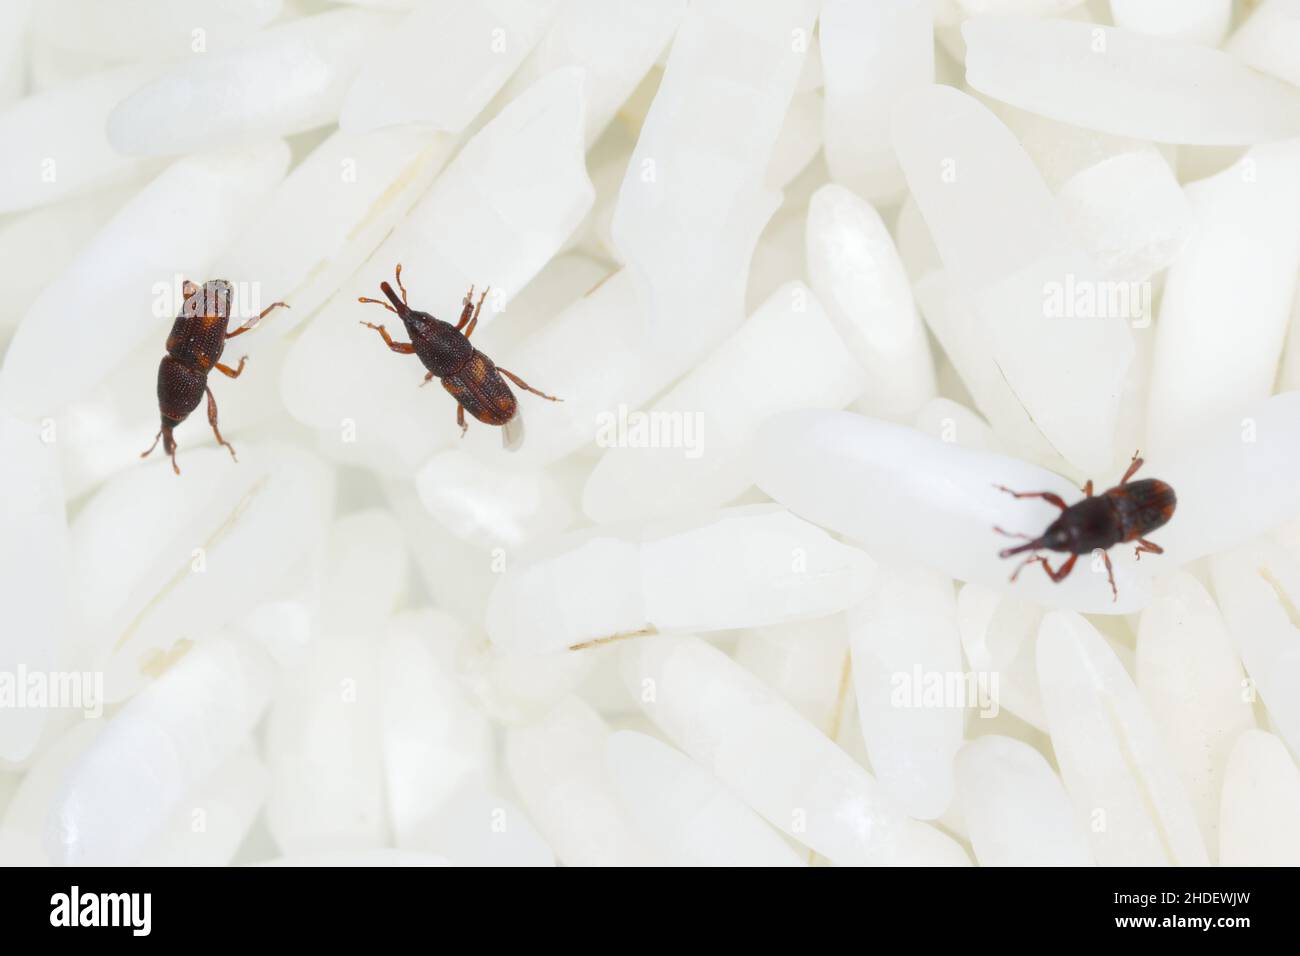 Close up of adults rice weevils (Sitophilus oryzae) on rice grains. Stock Photo